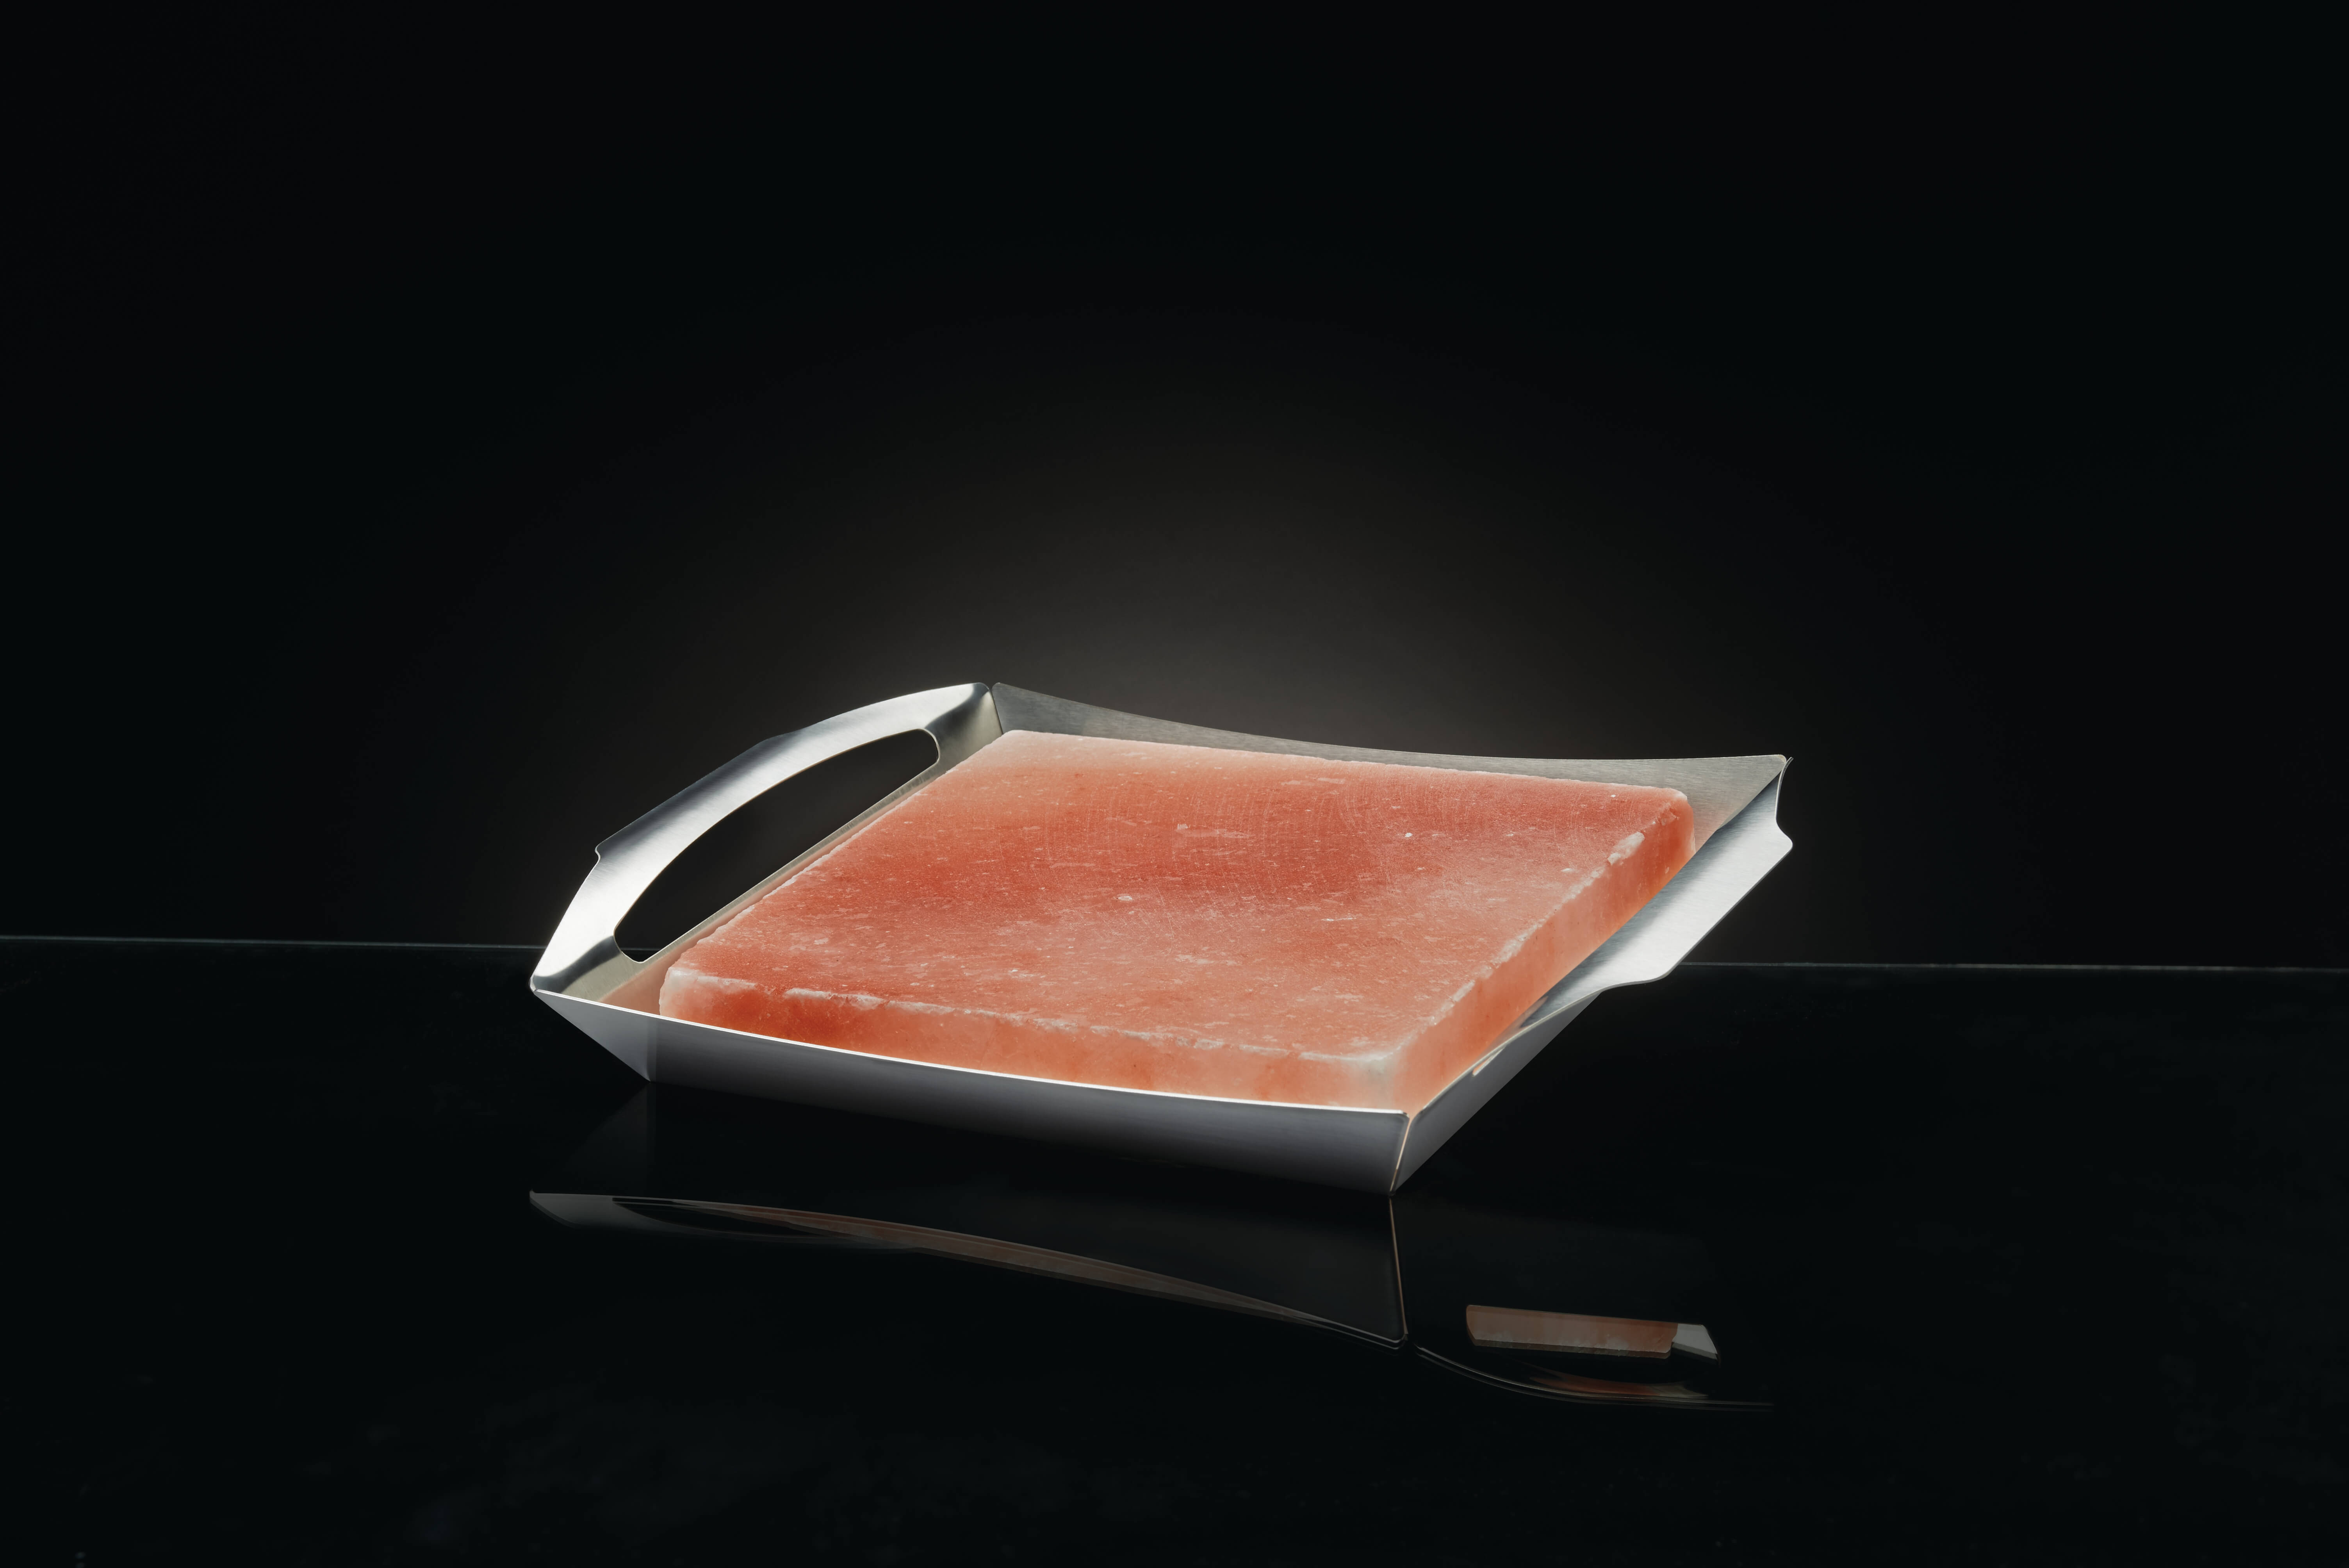 Himalayan Salt Block with PRO Grill Topper - image 1 of 4